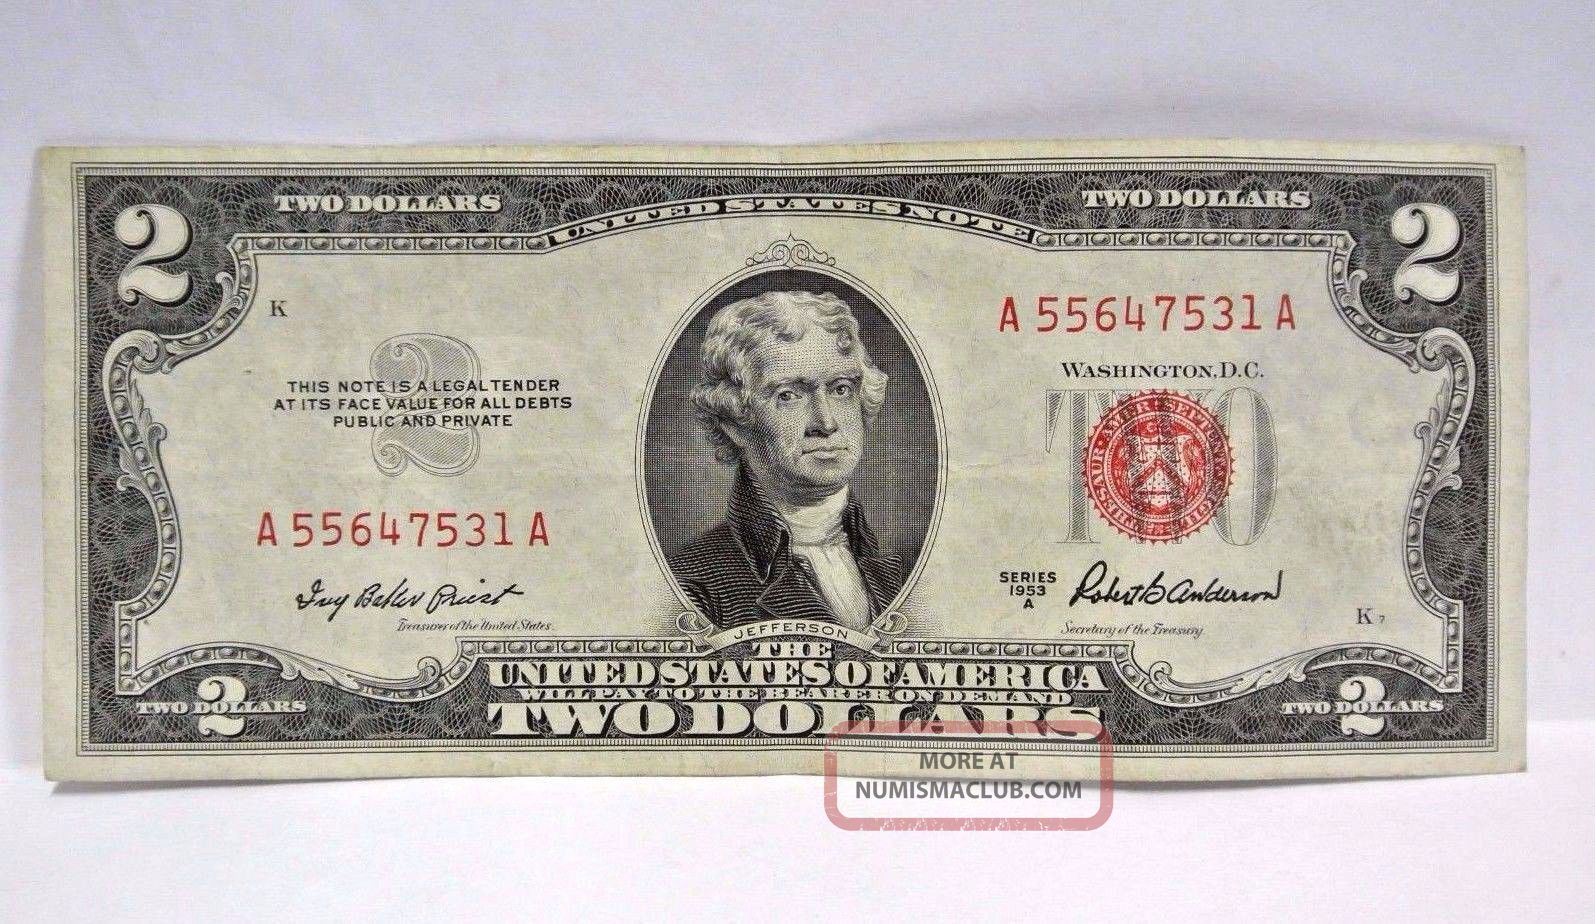 1953 A Two Dollar United States Note Red Seal (a 55647531 A) Pm77 Paper Money: US photo